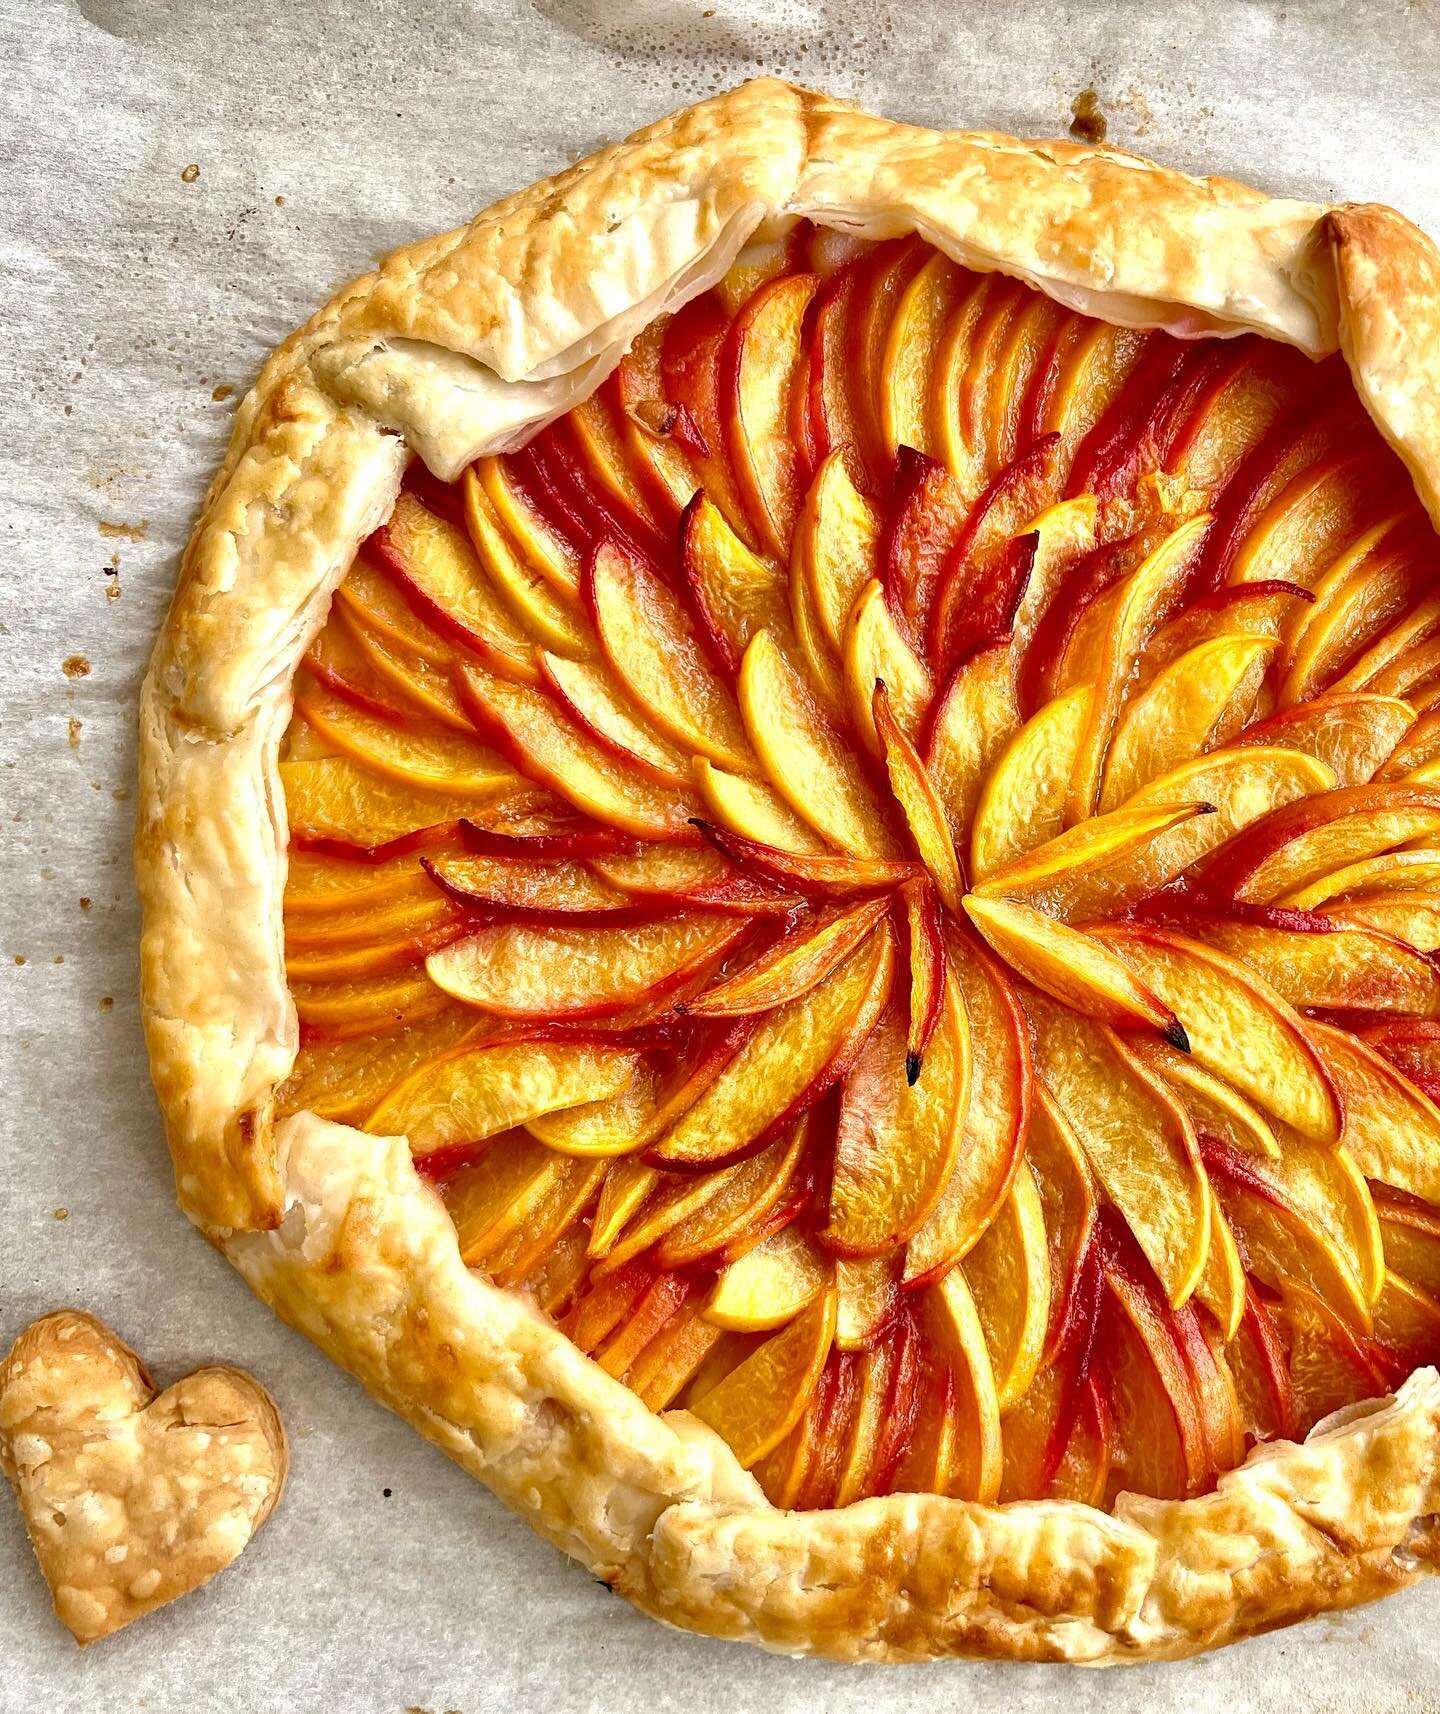 It's 🍑 season and nothing is better than a homemade galette made with 🧡!! 
-
@palisadepeaches #palisadepeaches🍑 #palisadepeachescolorado #homemadegalette #galette #peachgalette🍑 #palisadepeachgalette #icookyoueat #eataspen #cookwith🍑 #cookwith🧡